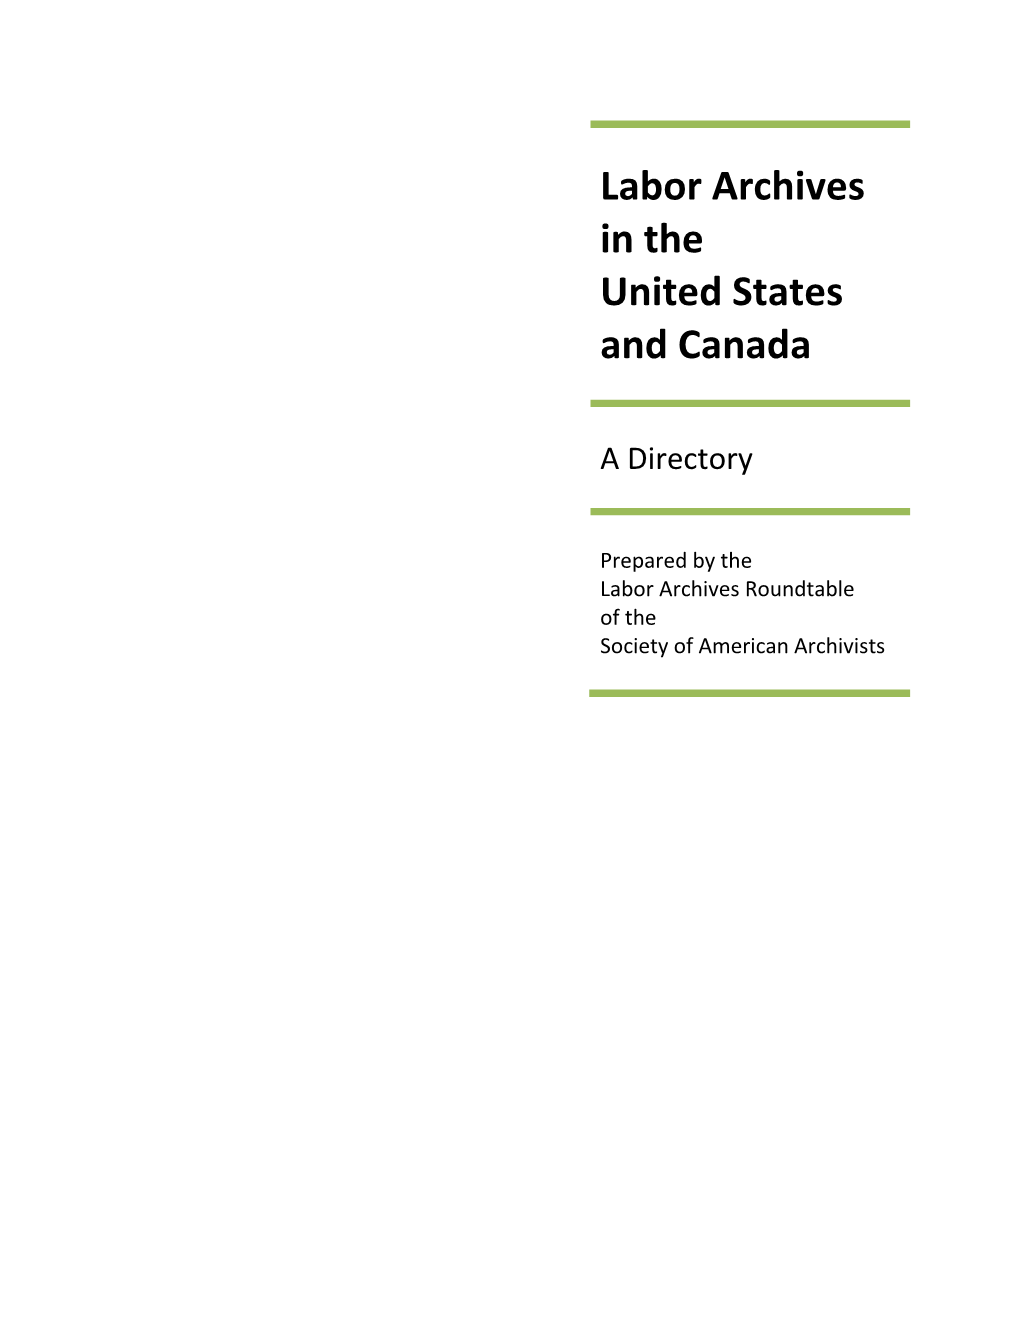 Labor Archives in the United States and Canada